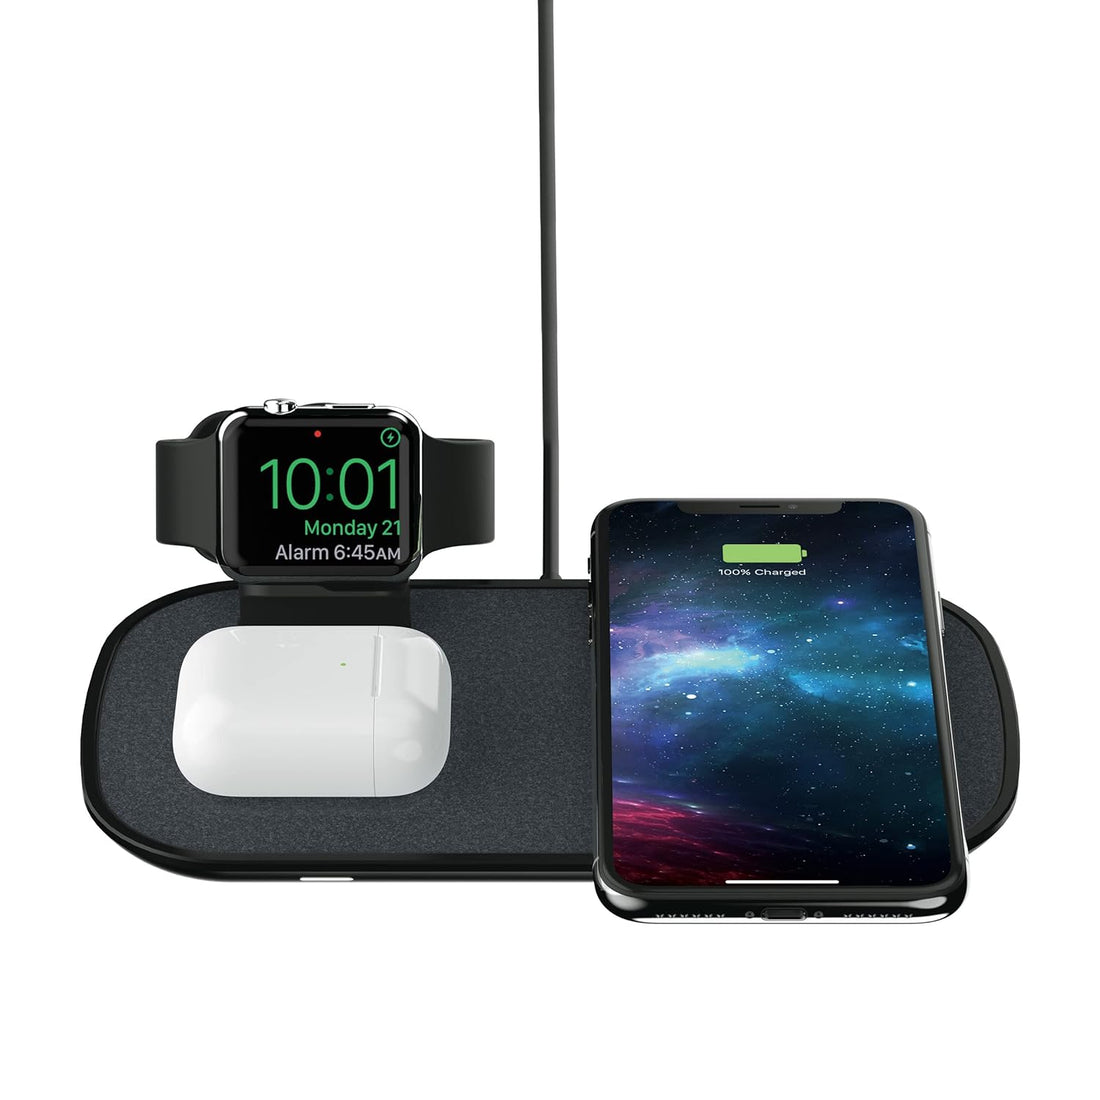 mophie 3 in 1 Wireless Charge Pad - Qi Wireless 7.5W Charging Pad for Apple iPhone, Airpods, and Apple Watch - Black